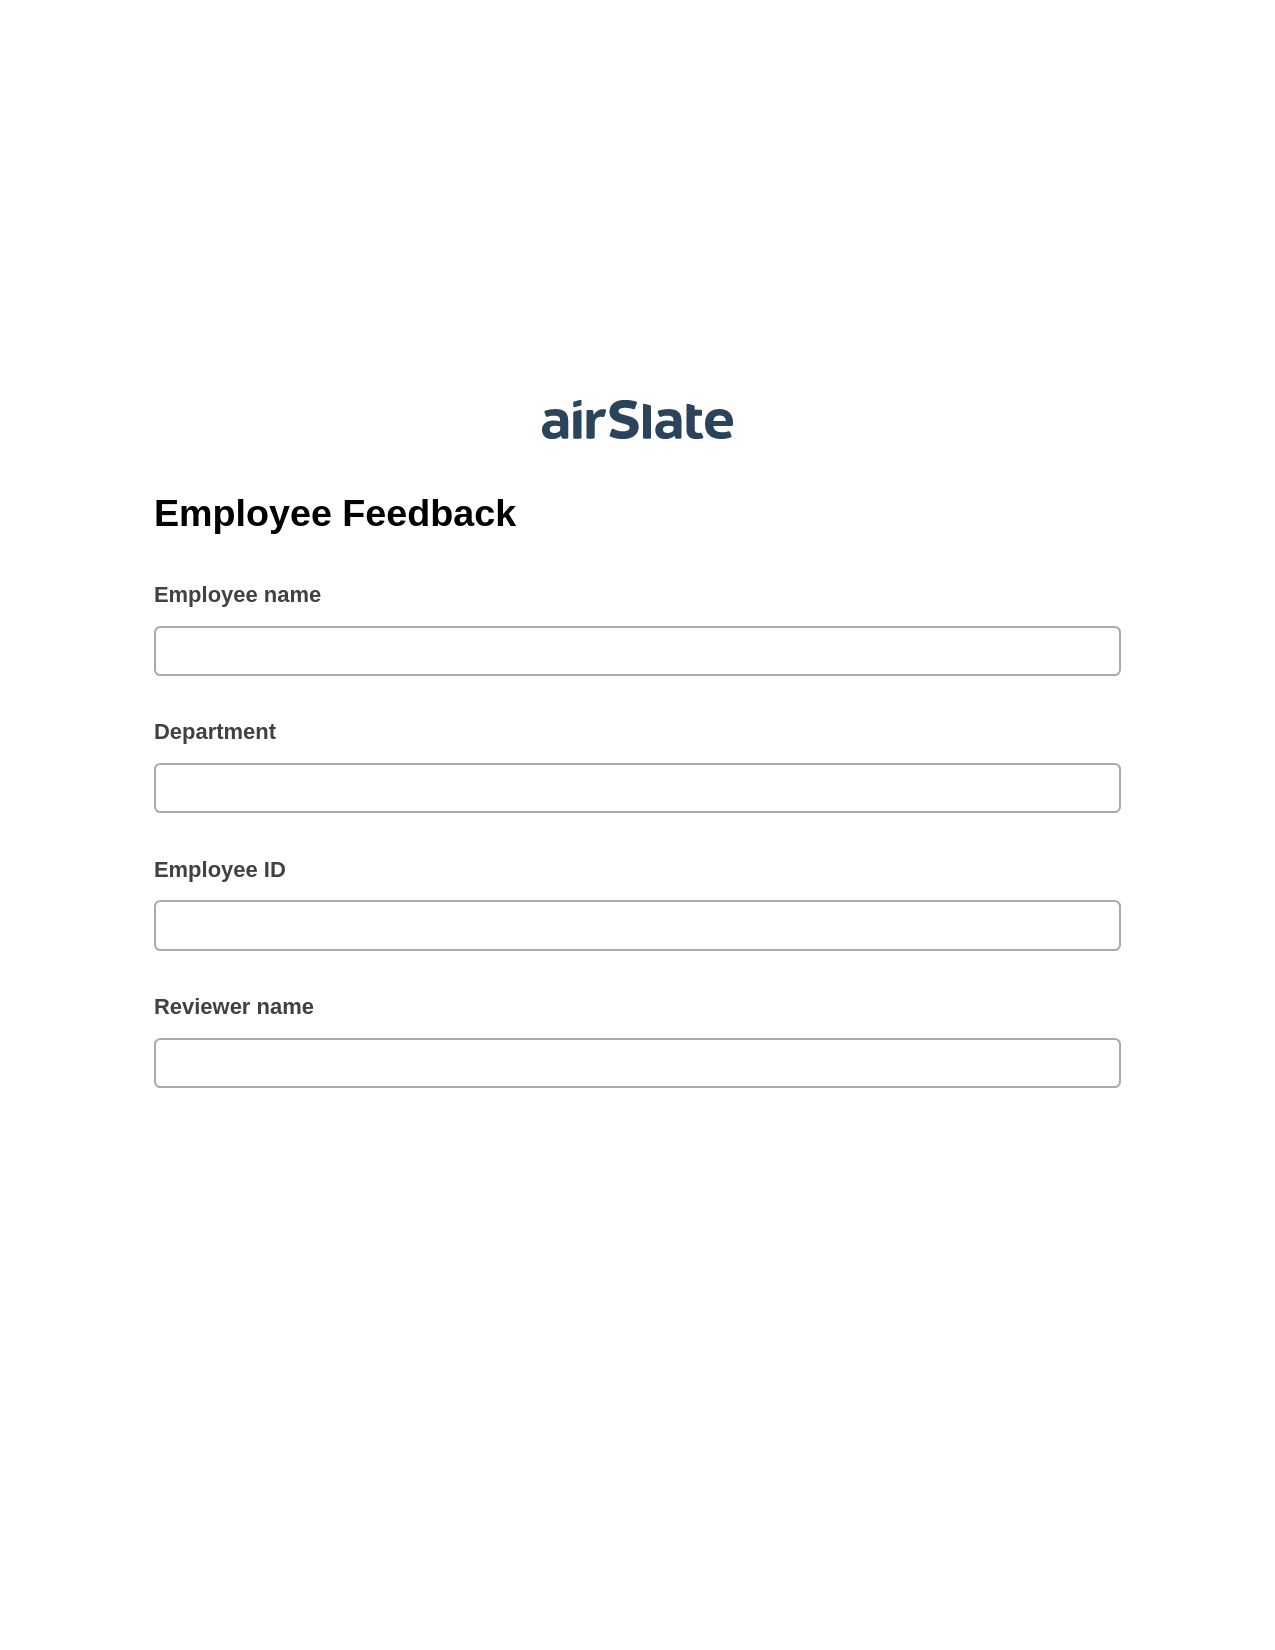 Multirole Employee Feedback Pre-fill from Salesforce Record Bot, Document Hide Bot, Export to Excel 365 Bot